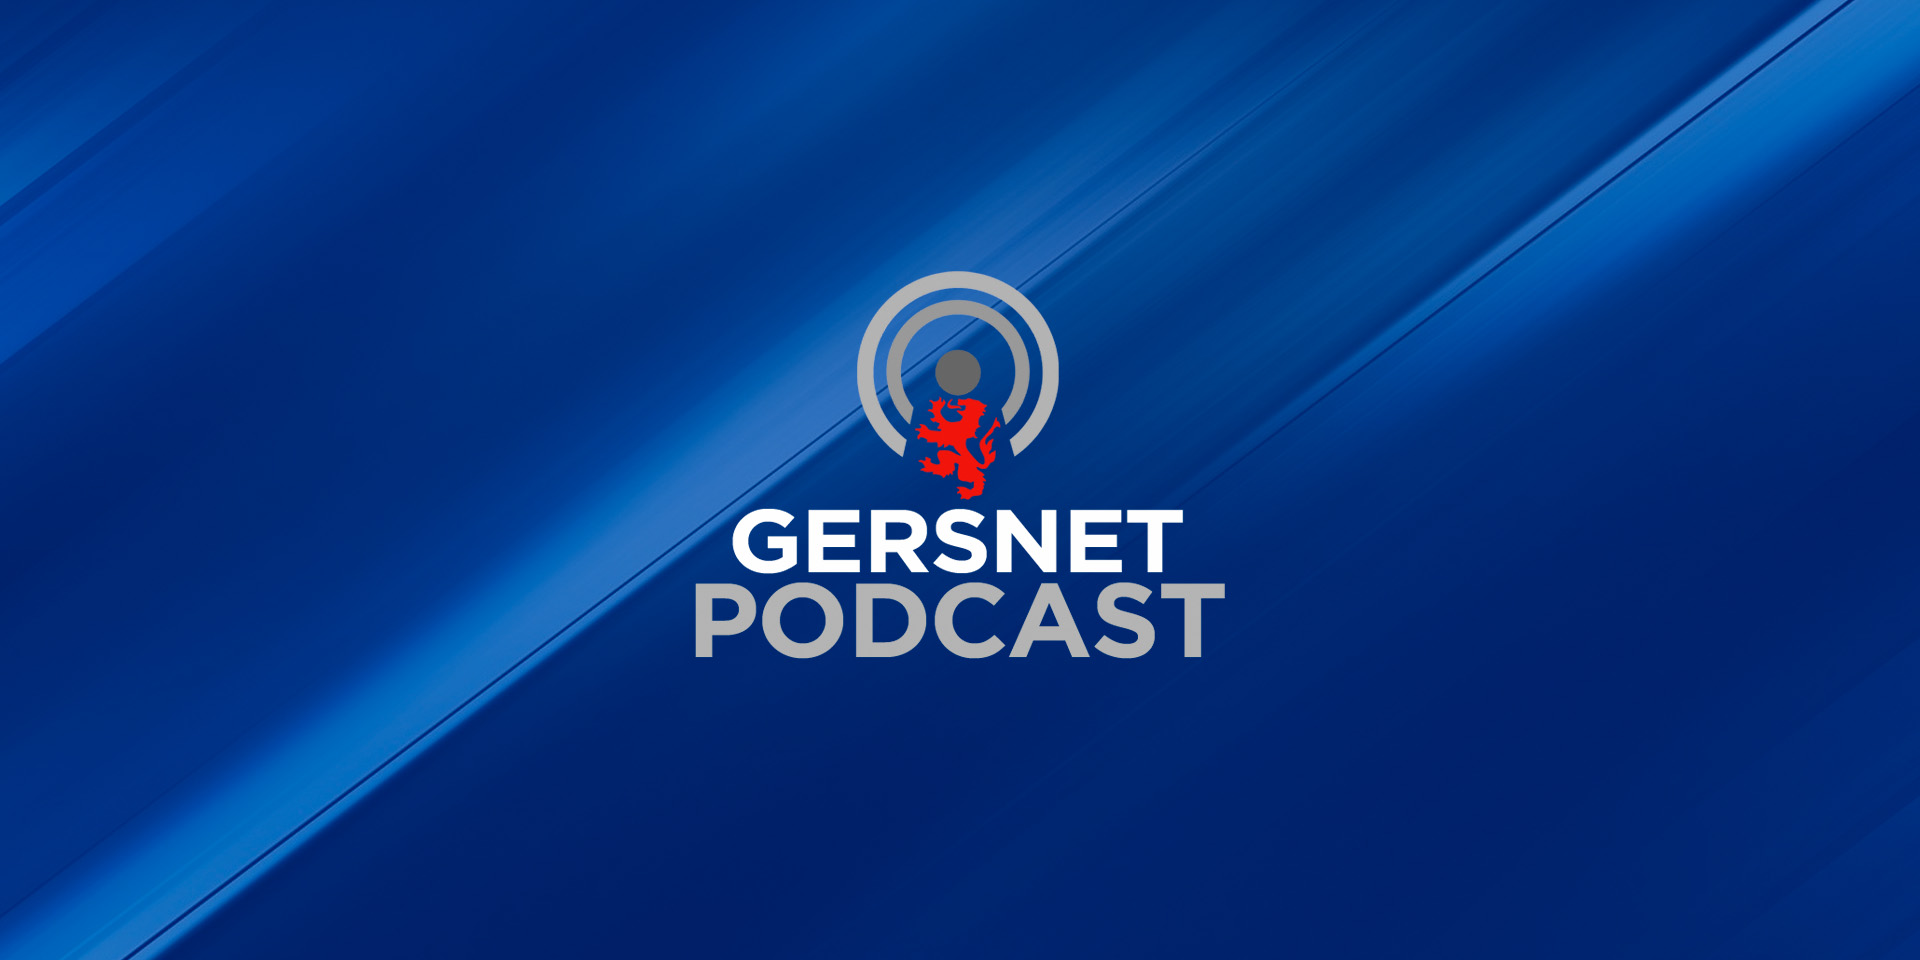 Gersnet Podcast 317 - Humbling the Hearts